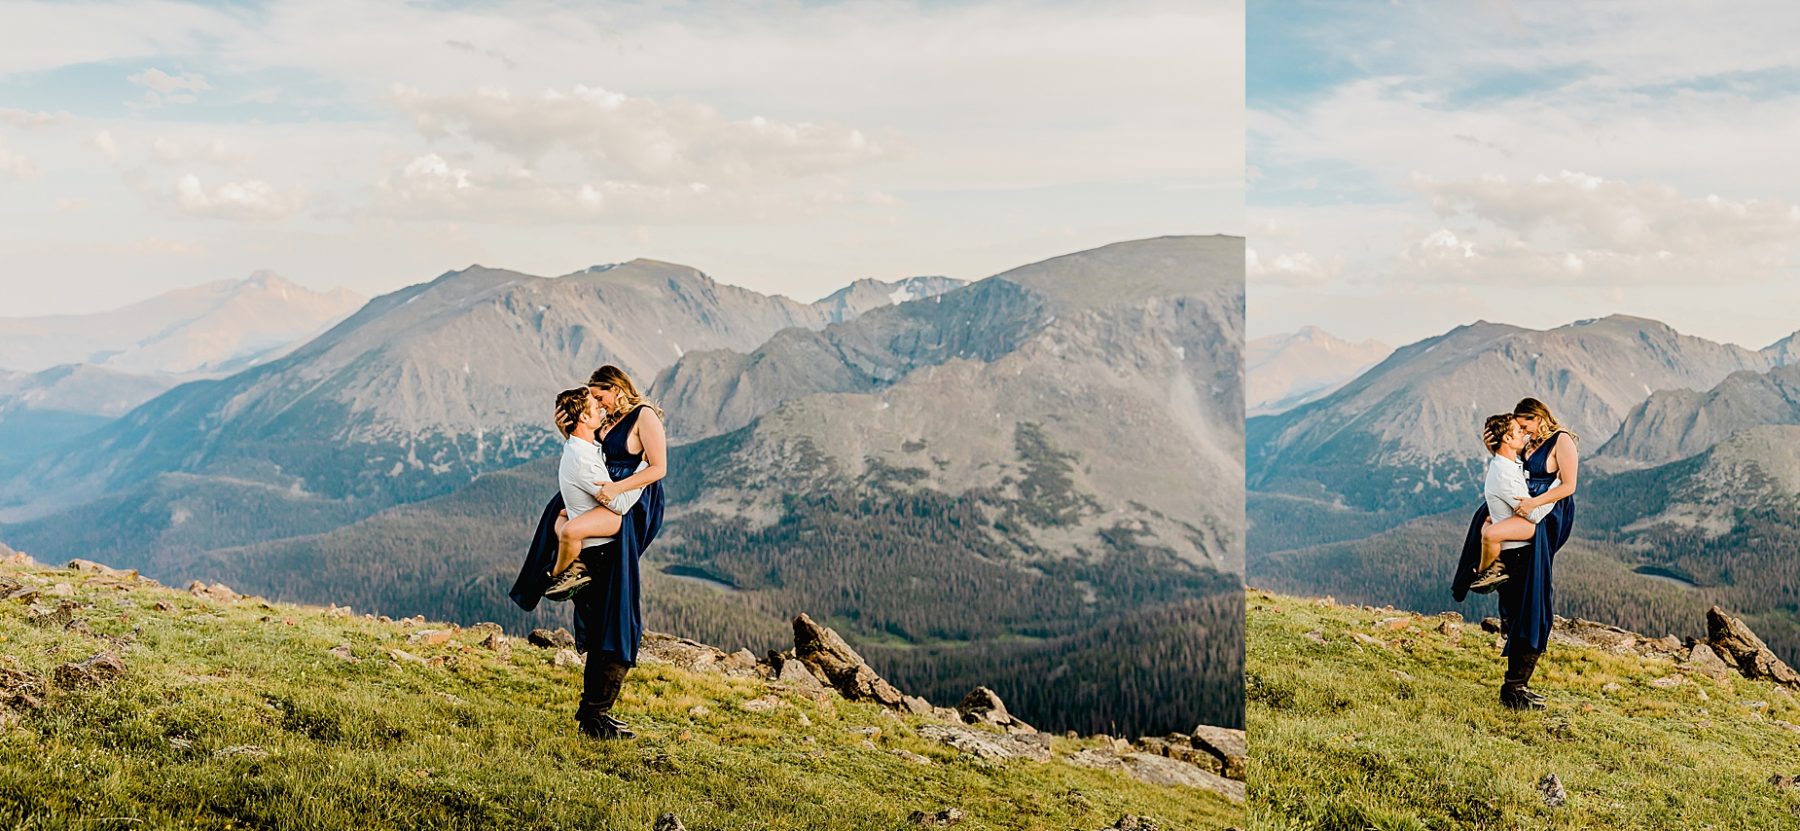 man holds woman up as they hug with a stunning colorado sunset and mountain background showing off the beautiful colors of trail ridge road